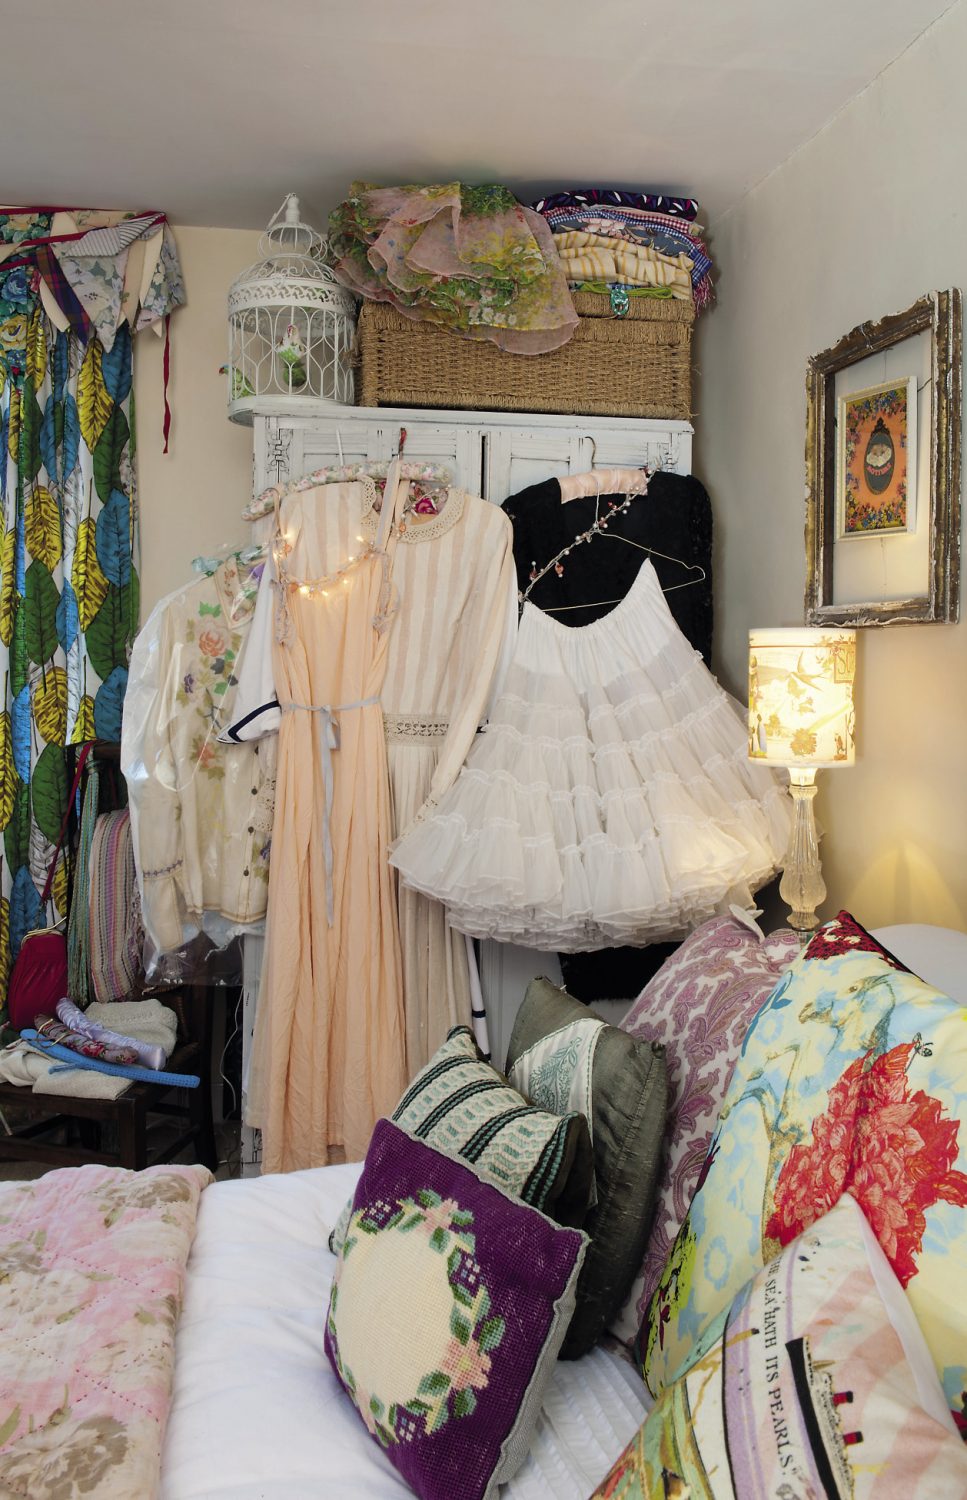 the guest room, but with so many vintage clothes and accessories on display is really more of a ‘boudoir’